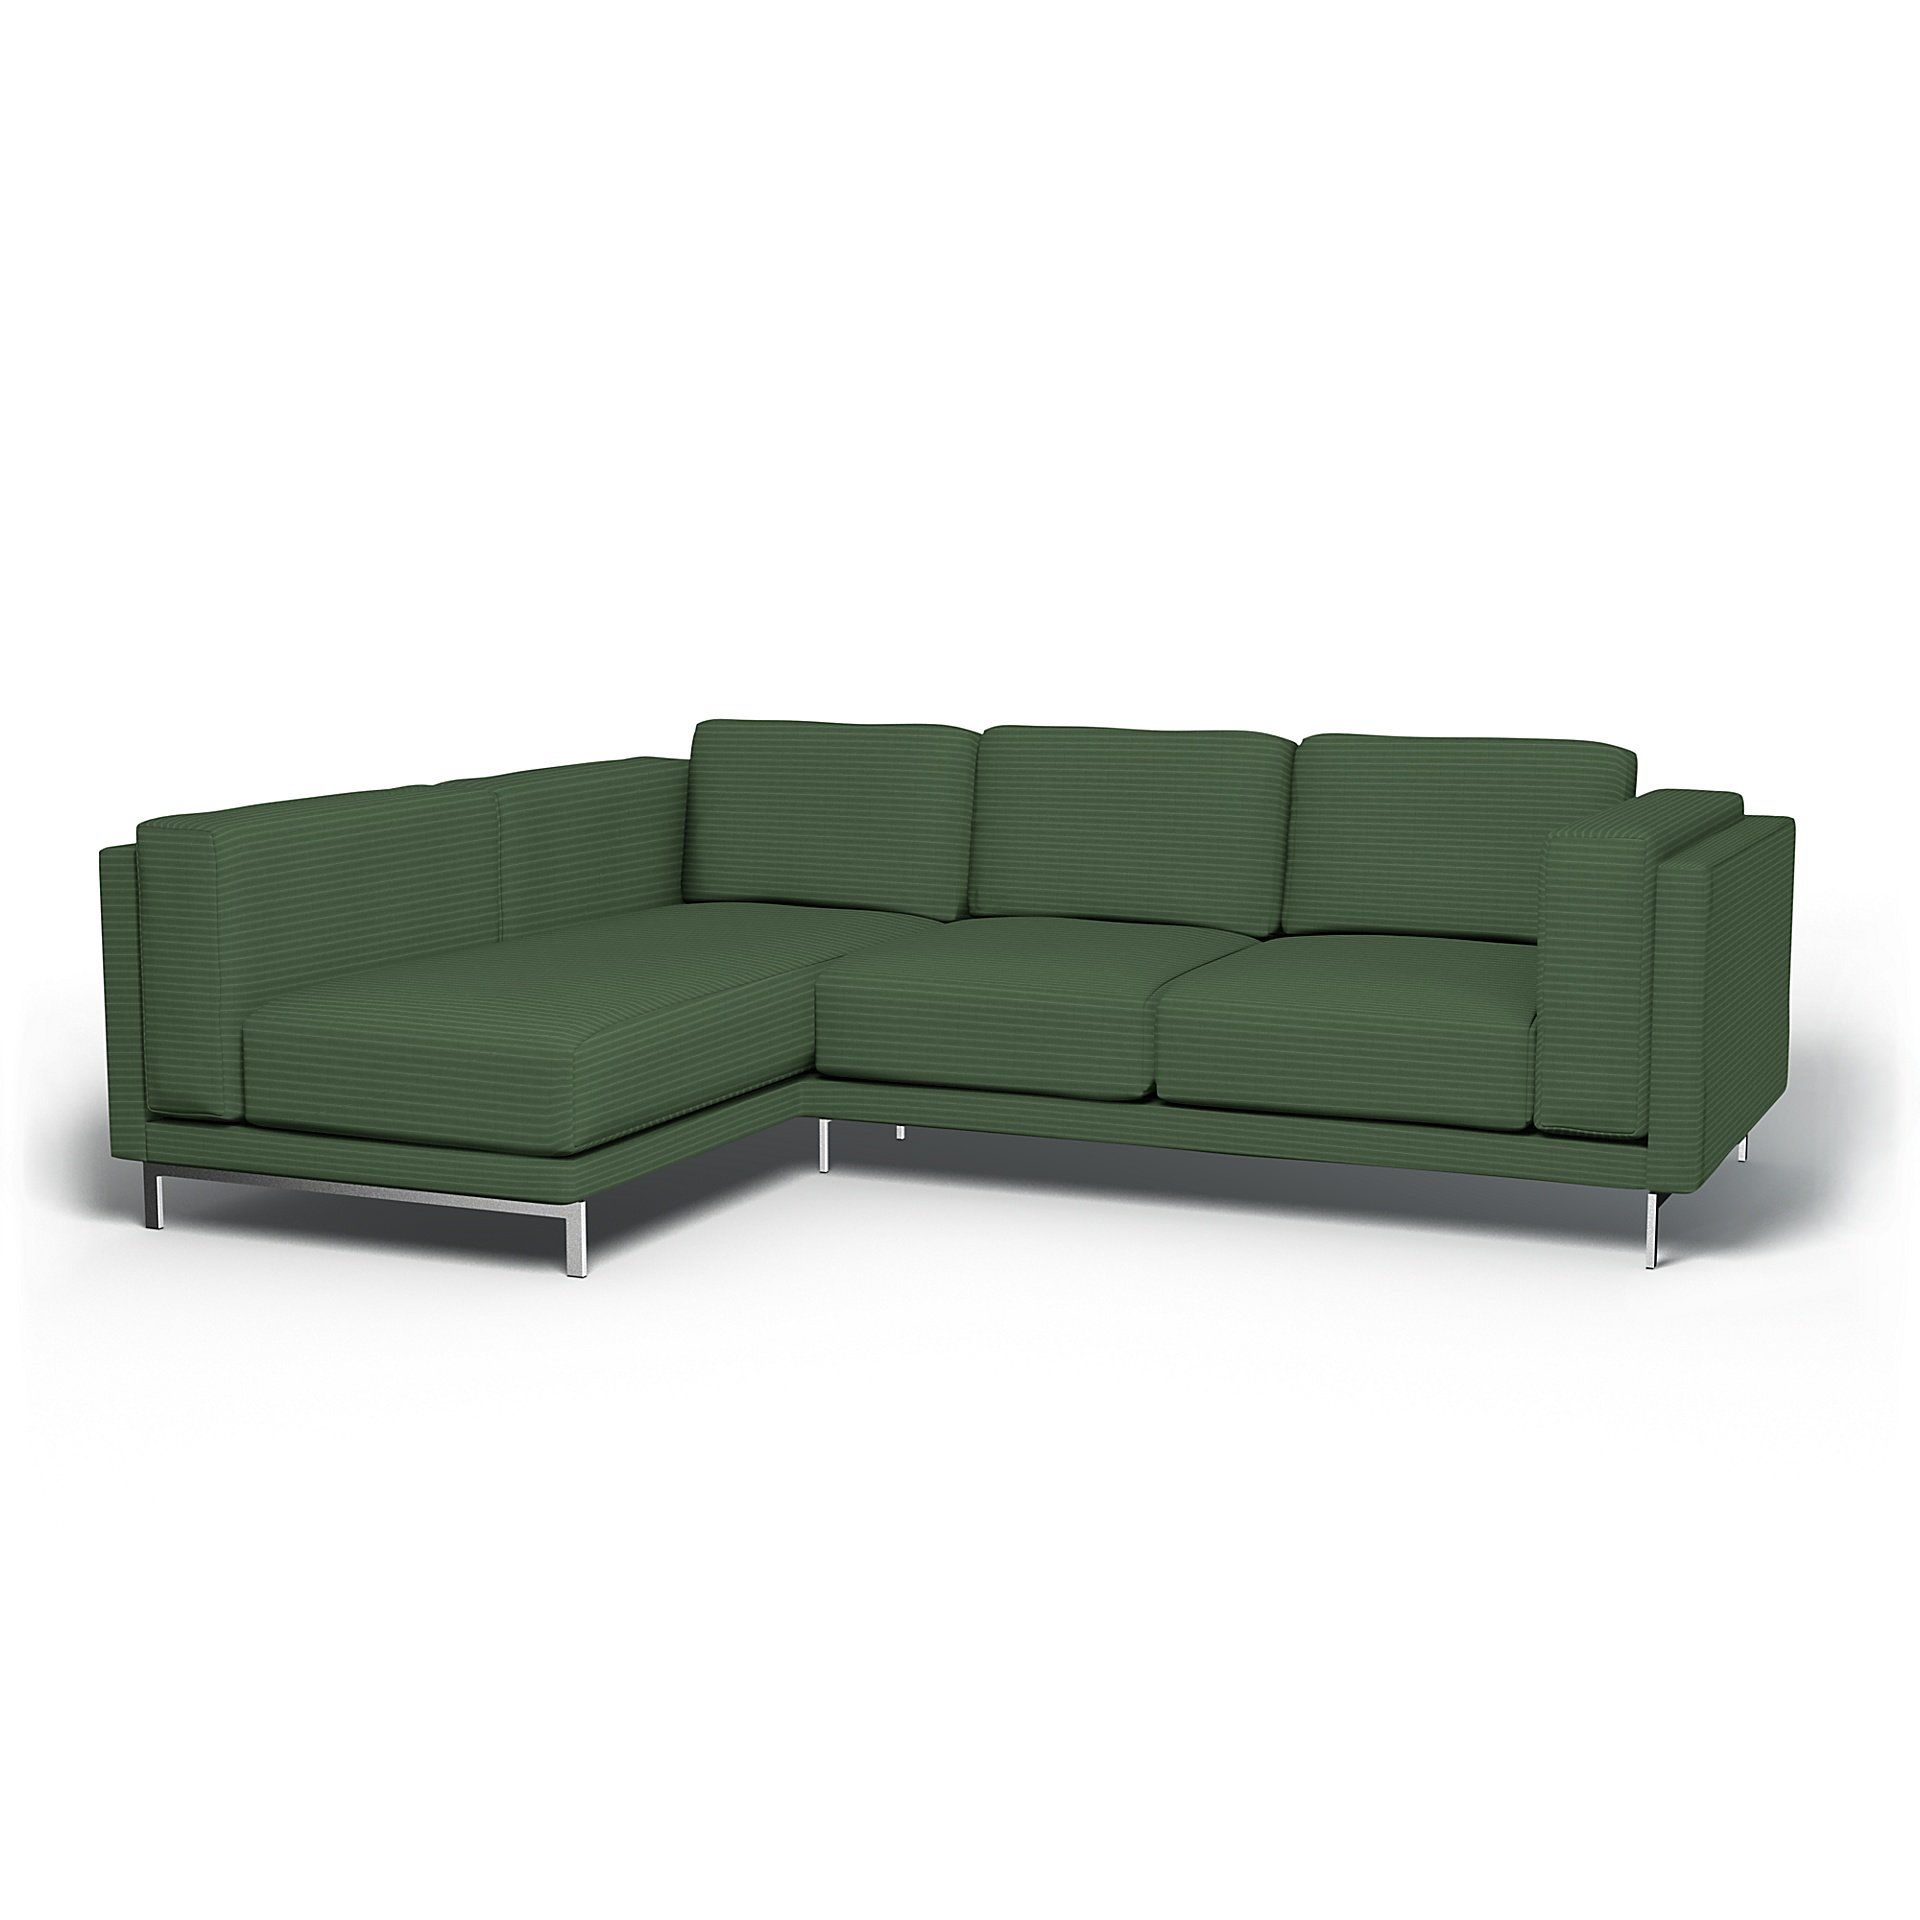 IKEA - Nockeby 3 Seater Sofa with Left Chaise Cover, Palm Green, Corduroy - Bemz